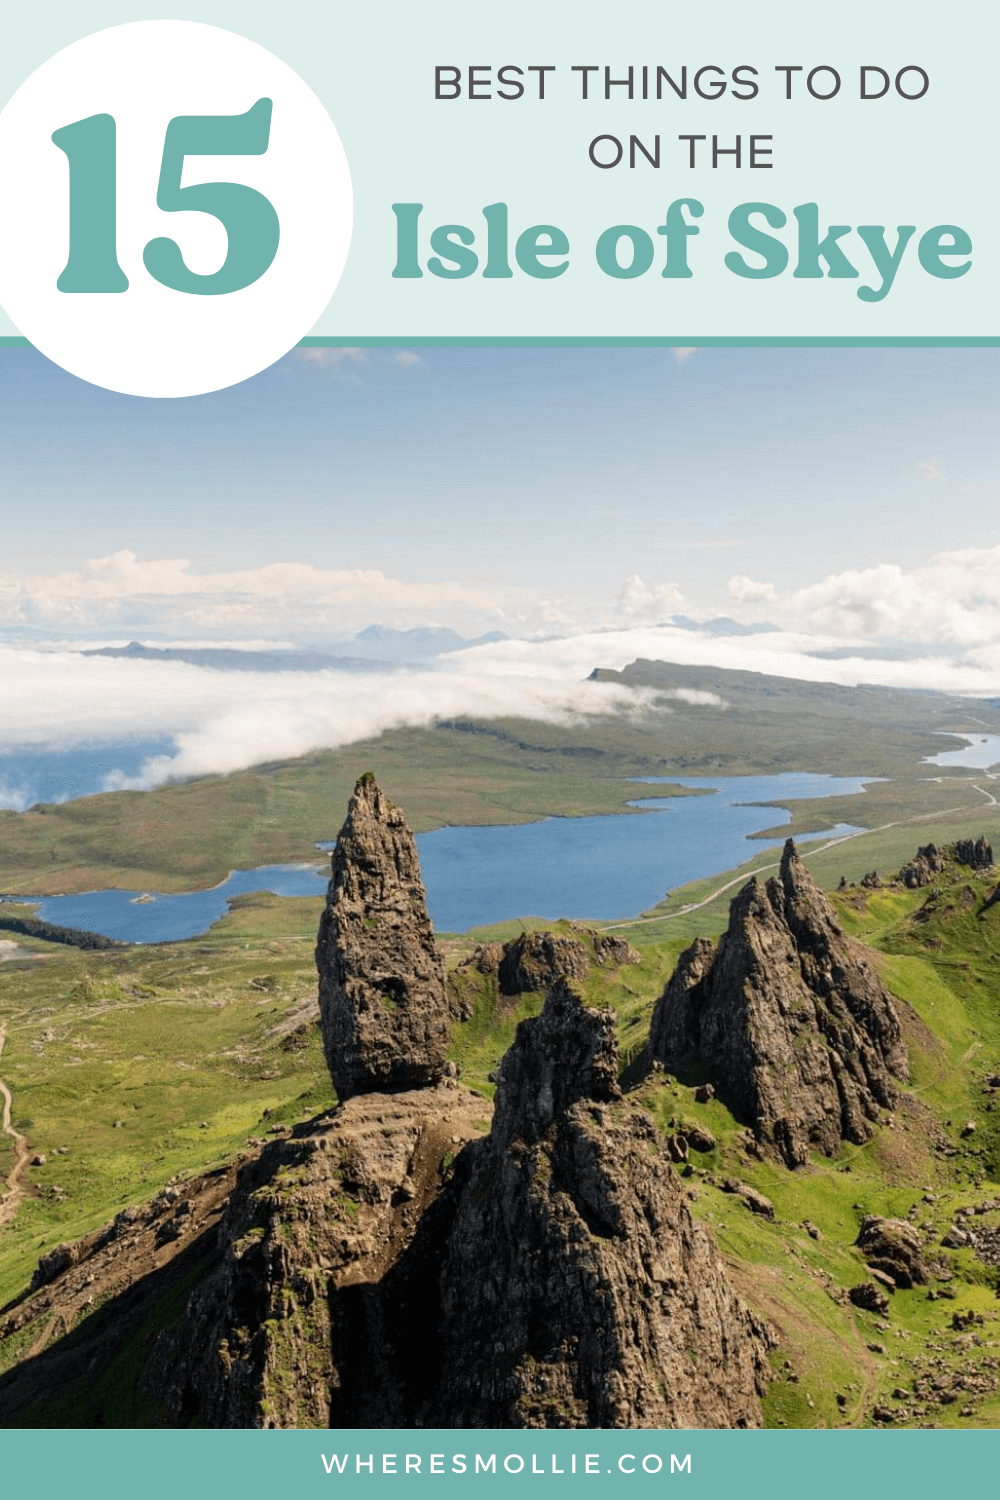 The best things to do on the Isle of Skye, Scotland